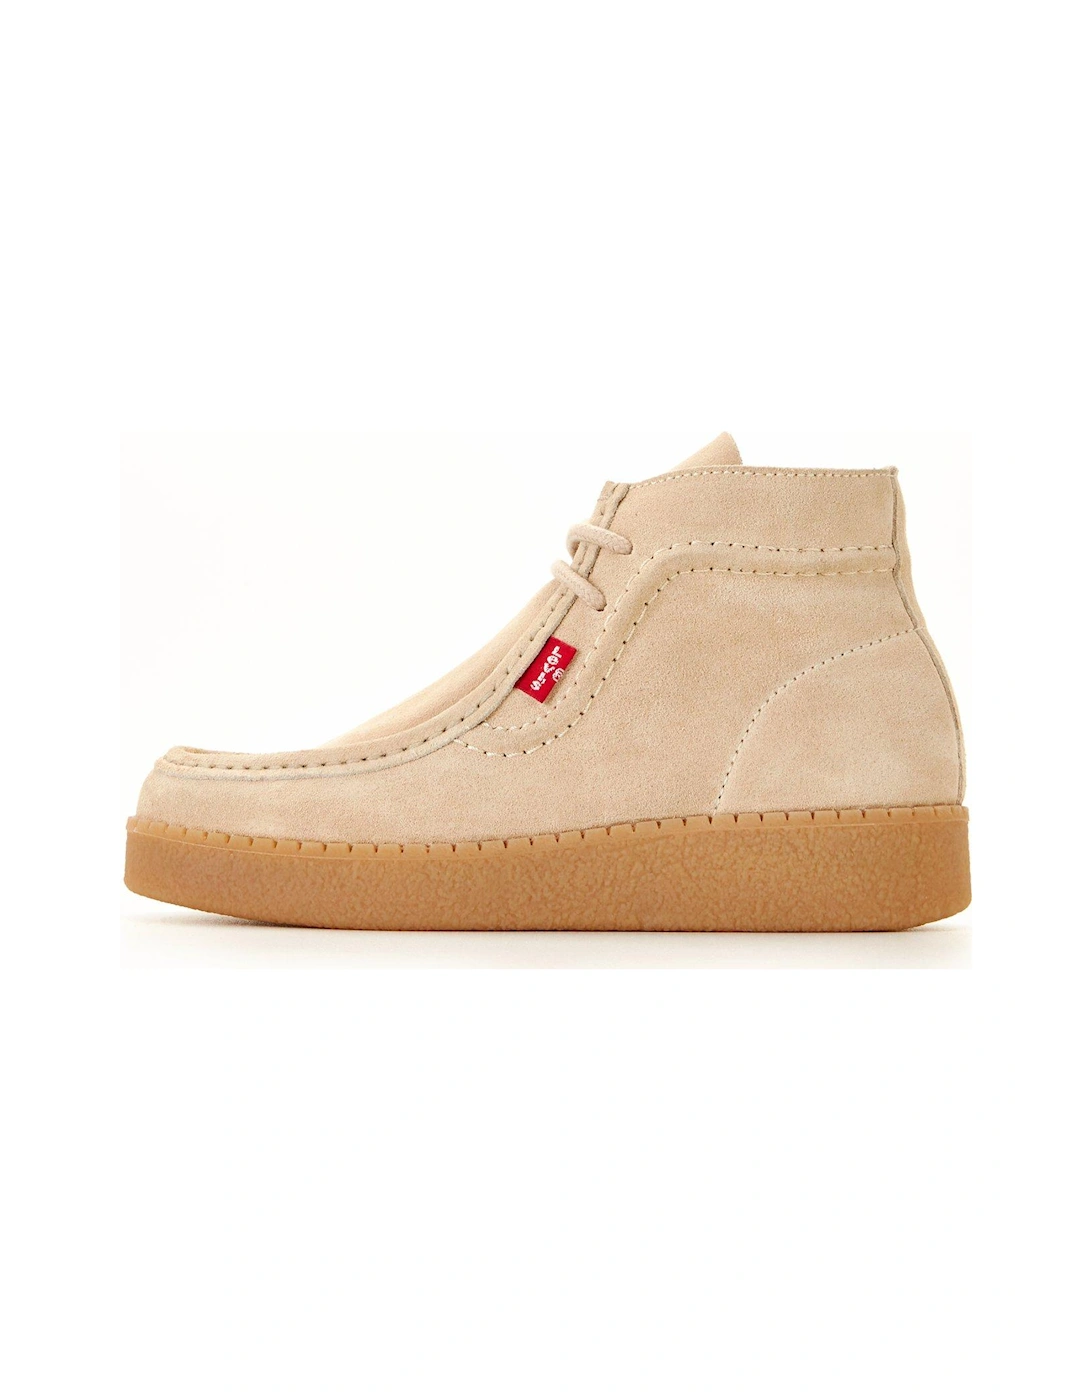 Suede Red Tab Boot - Beige, 7 of 6